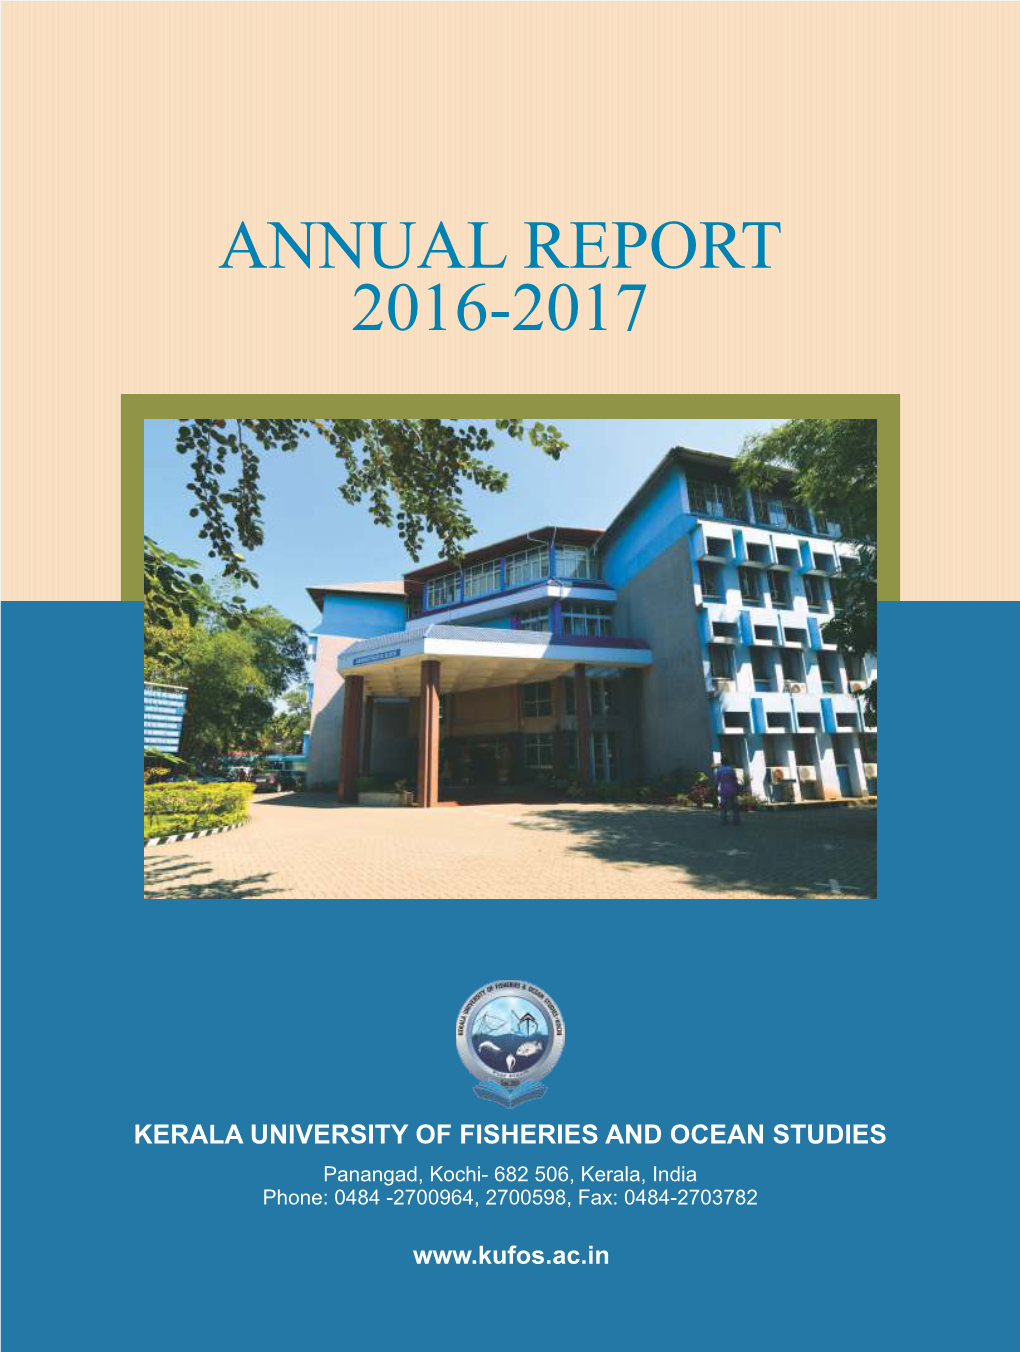 Annual Report 2016-2017 Contents